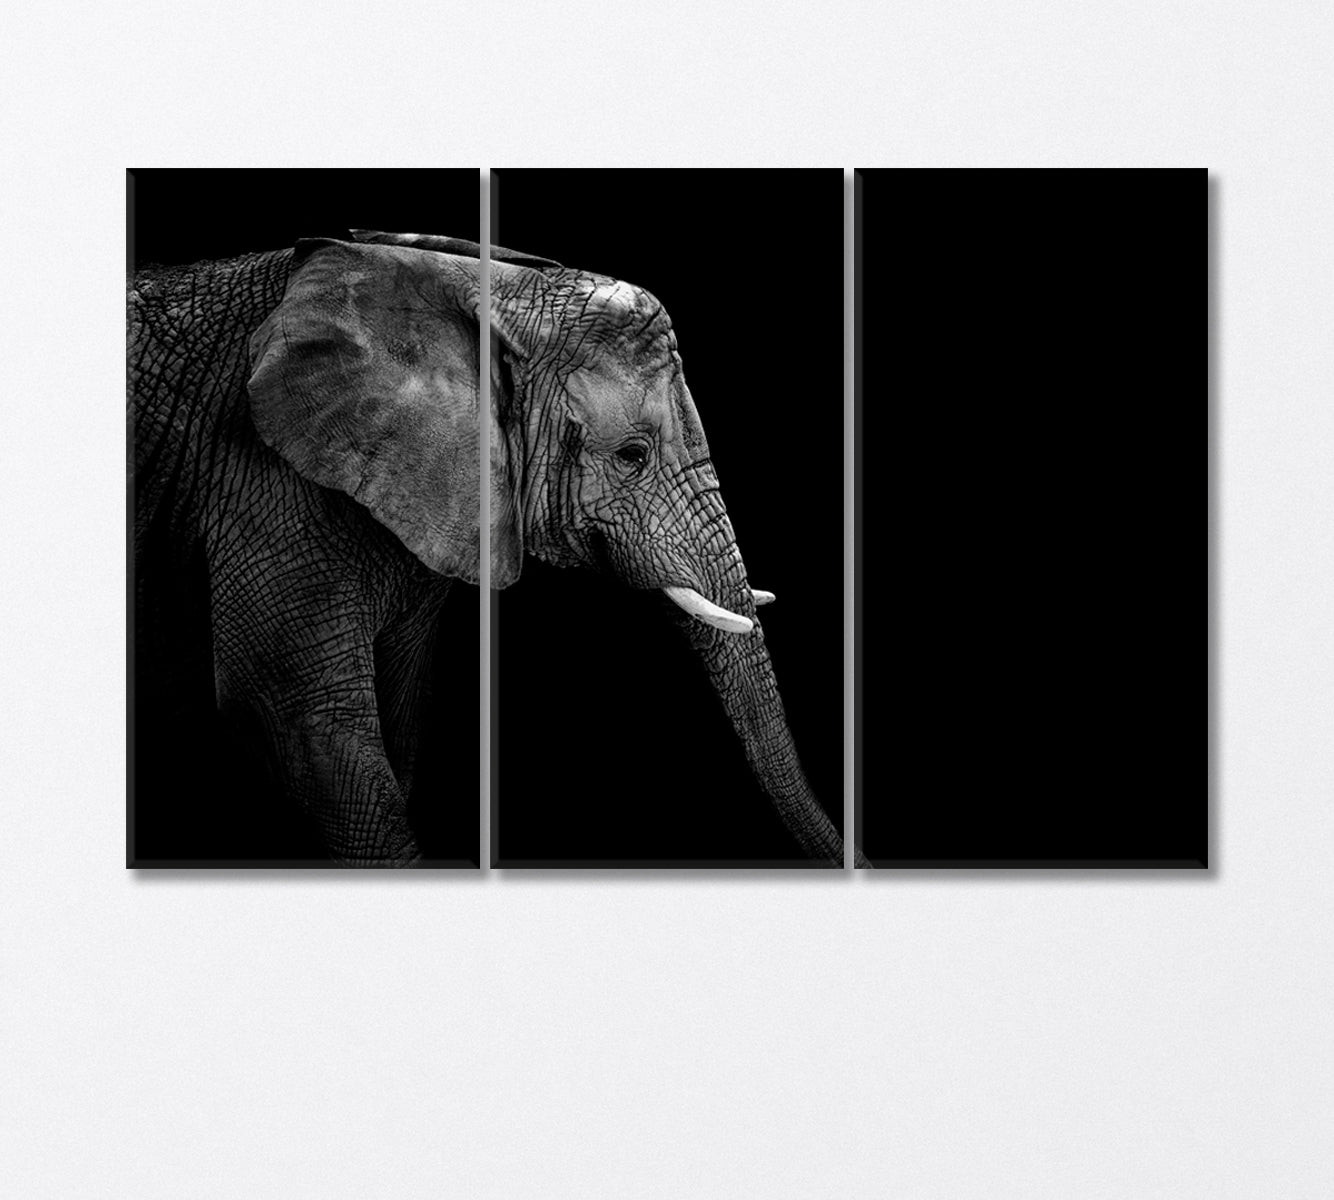 African Elephant Face in Black White Canvas Print-Canvas Print-CetArt-3 Panels-36x24 inches-CetArt